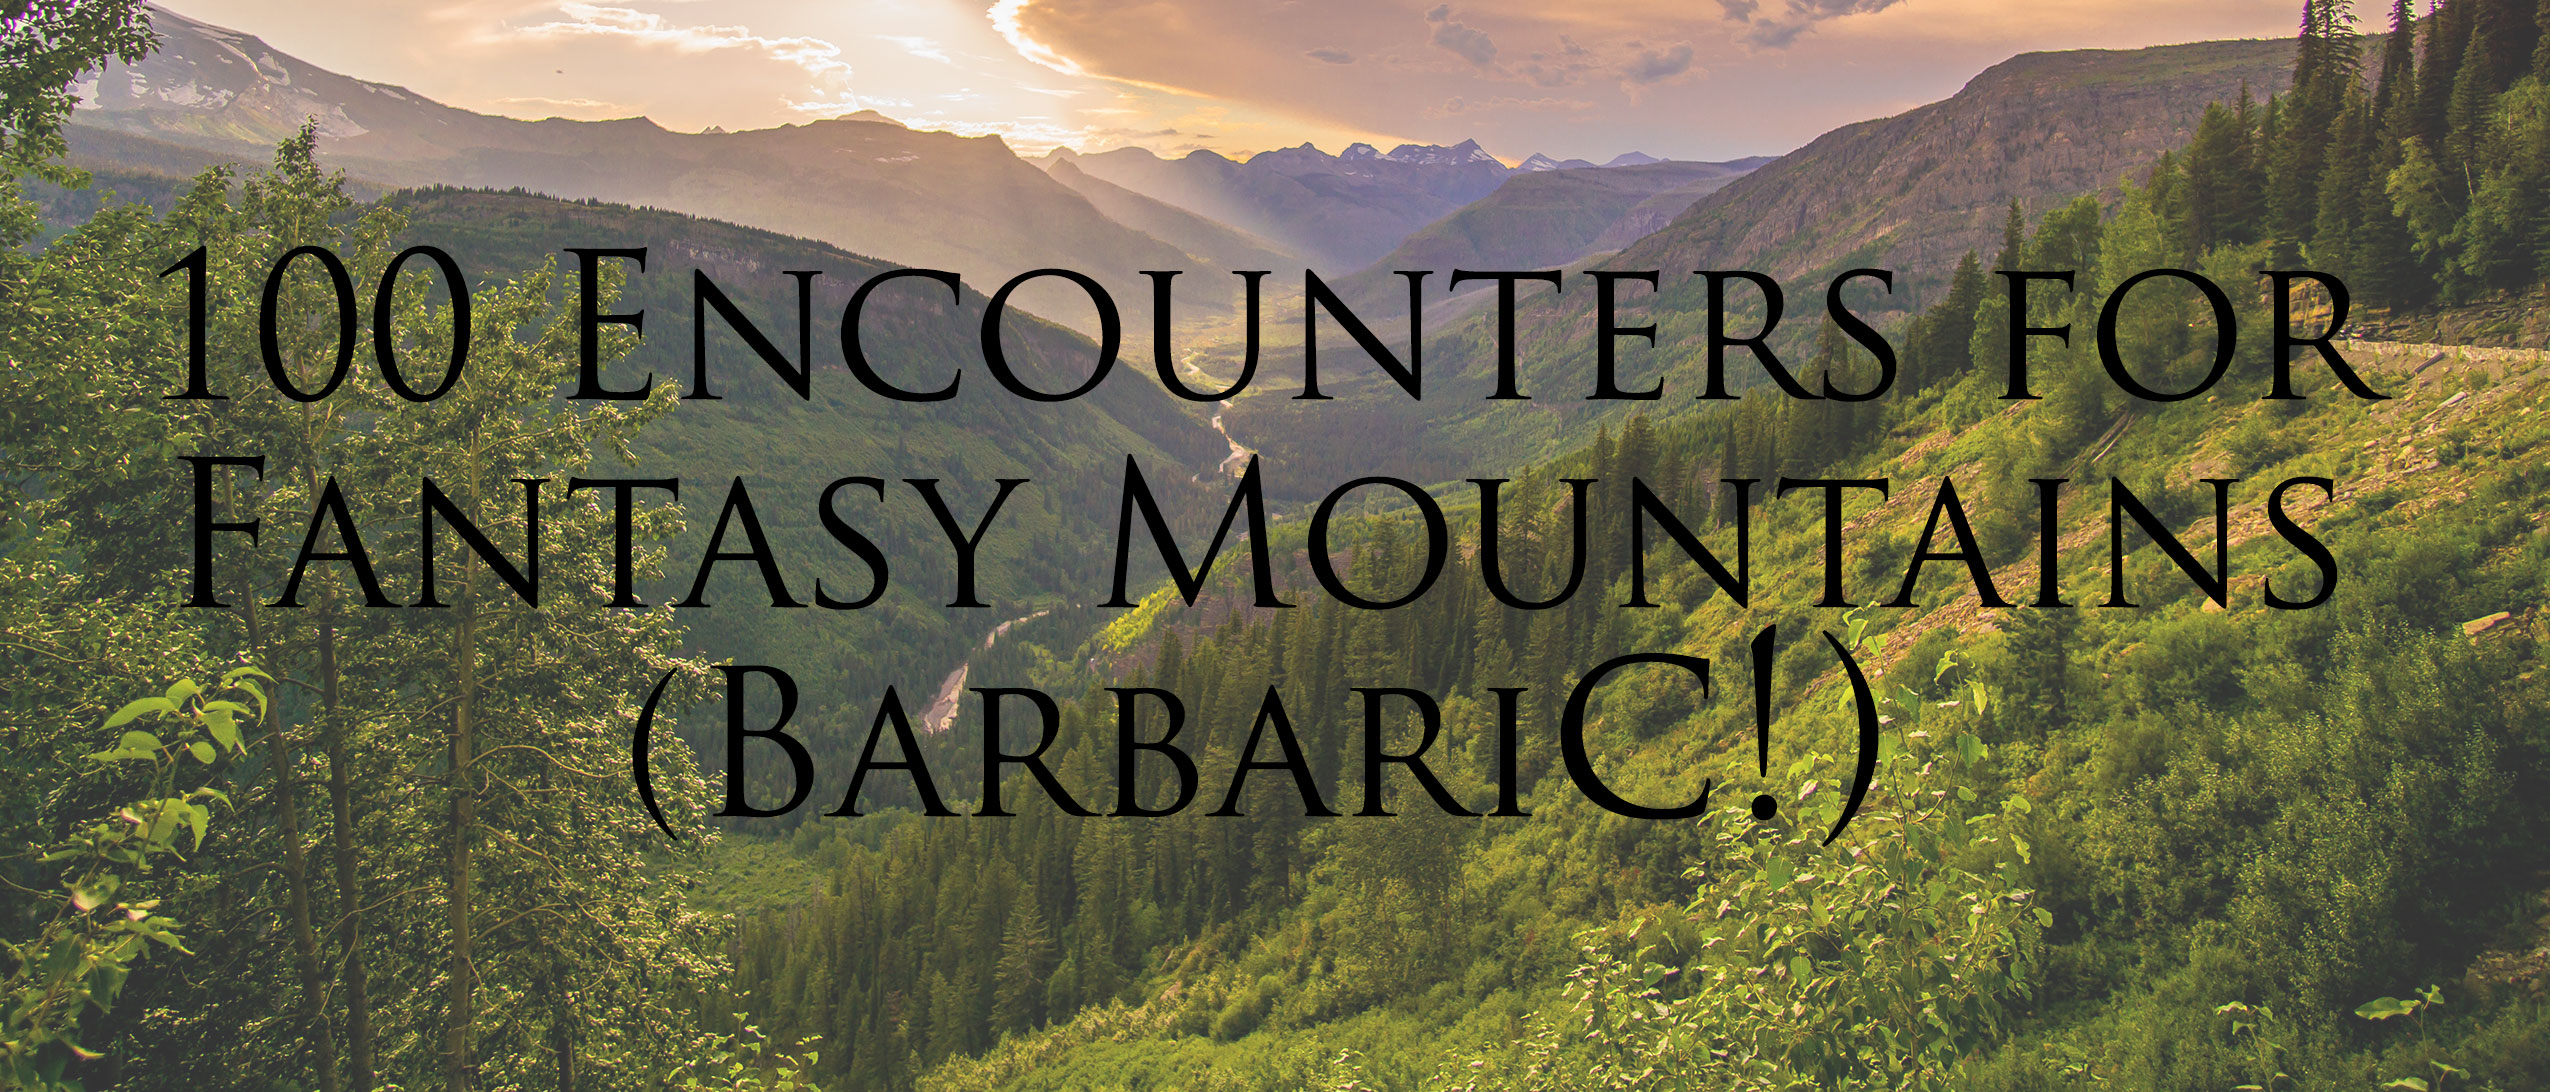 100 Encounters for Fantasy Mountains (Barbaric!)